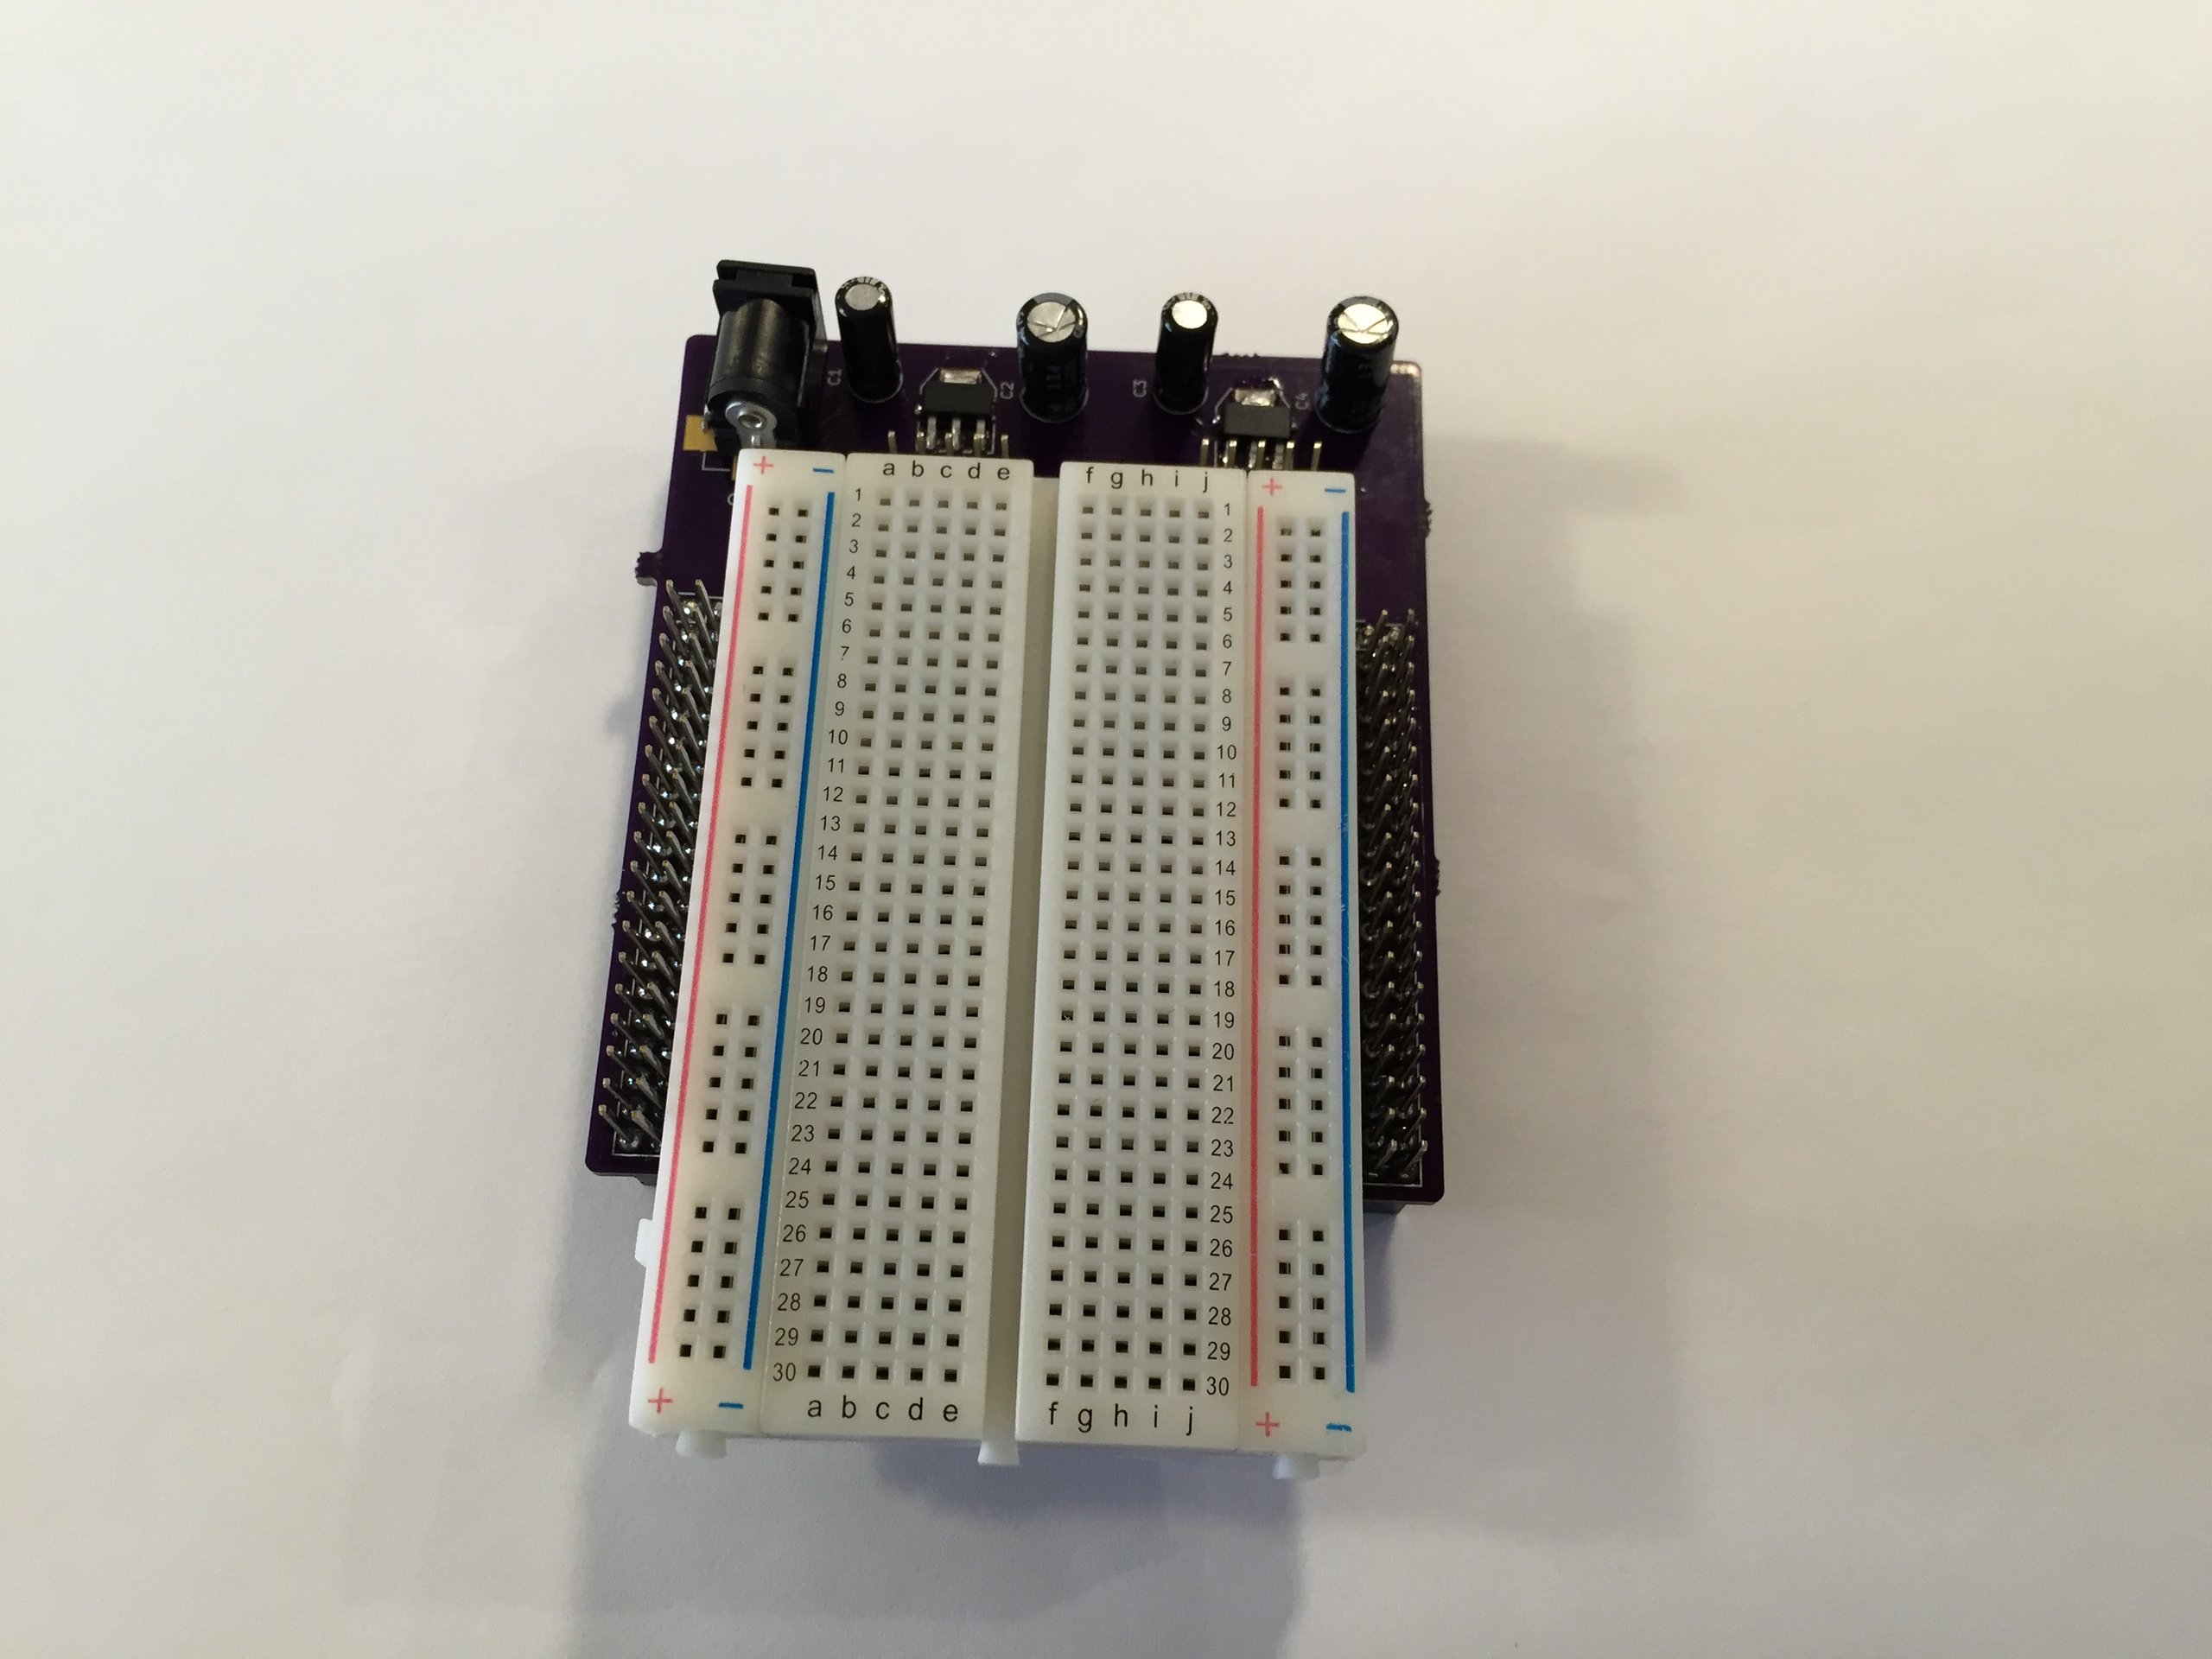 nucleo board without morpho header pins